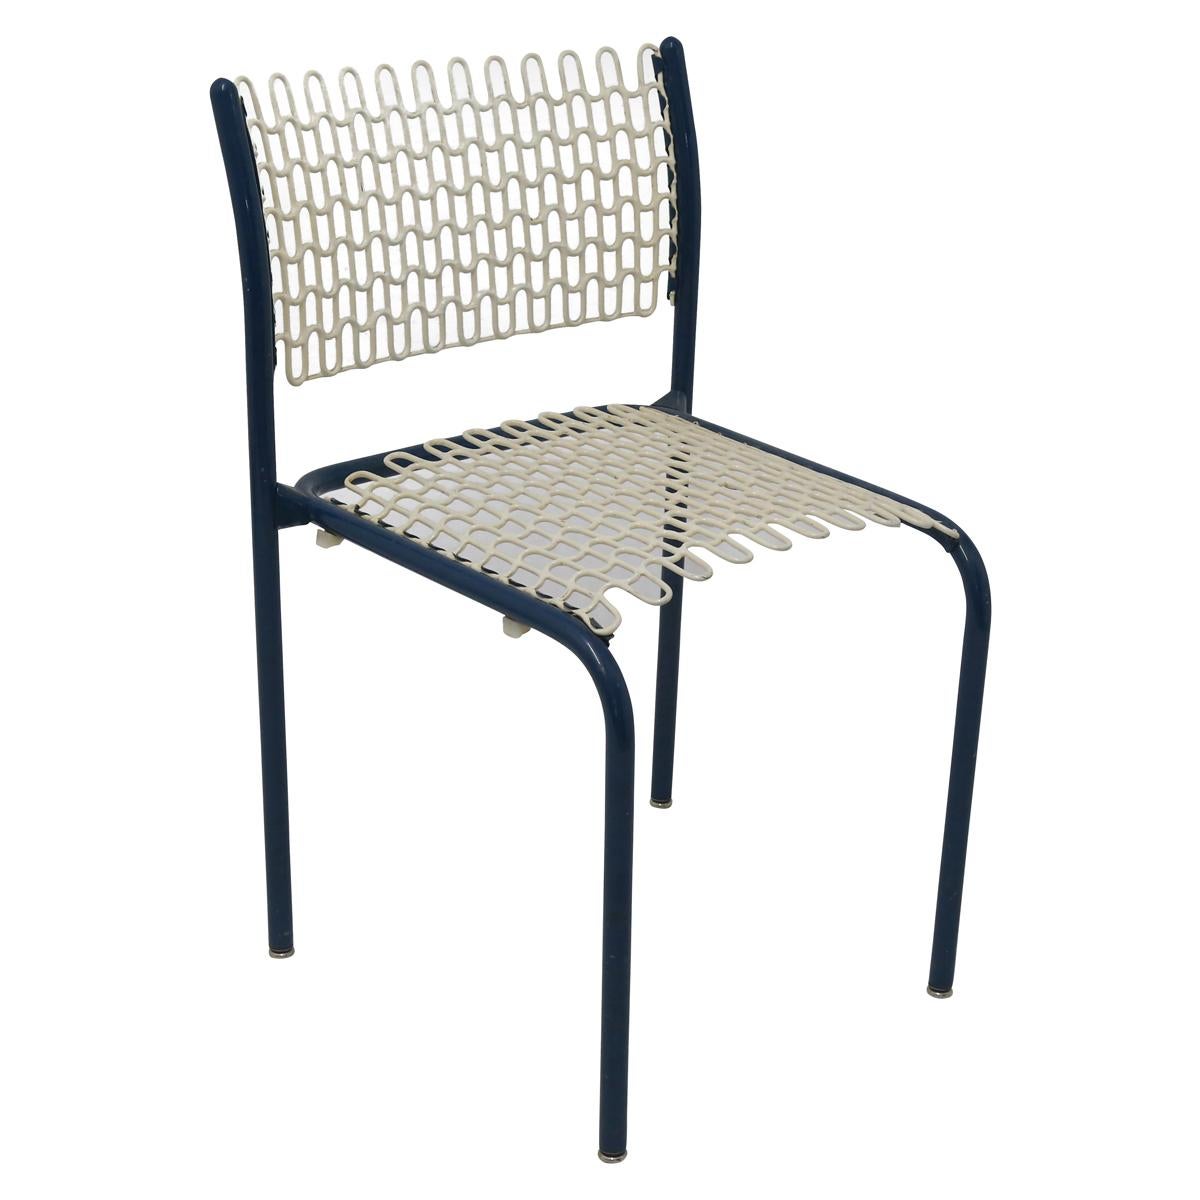 Metalwork Set of Four Modernist Indoor/Outdoor Chairs with Mesh Seats and Backs For Sale